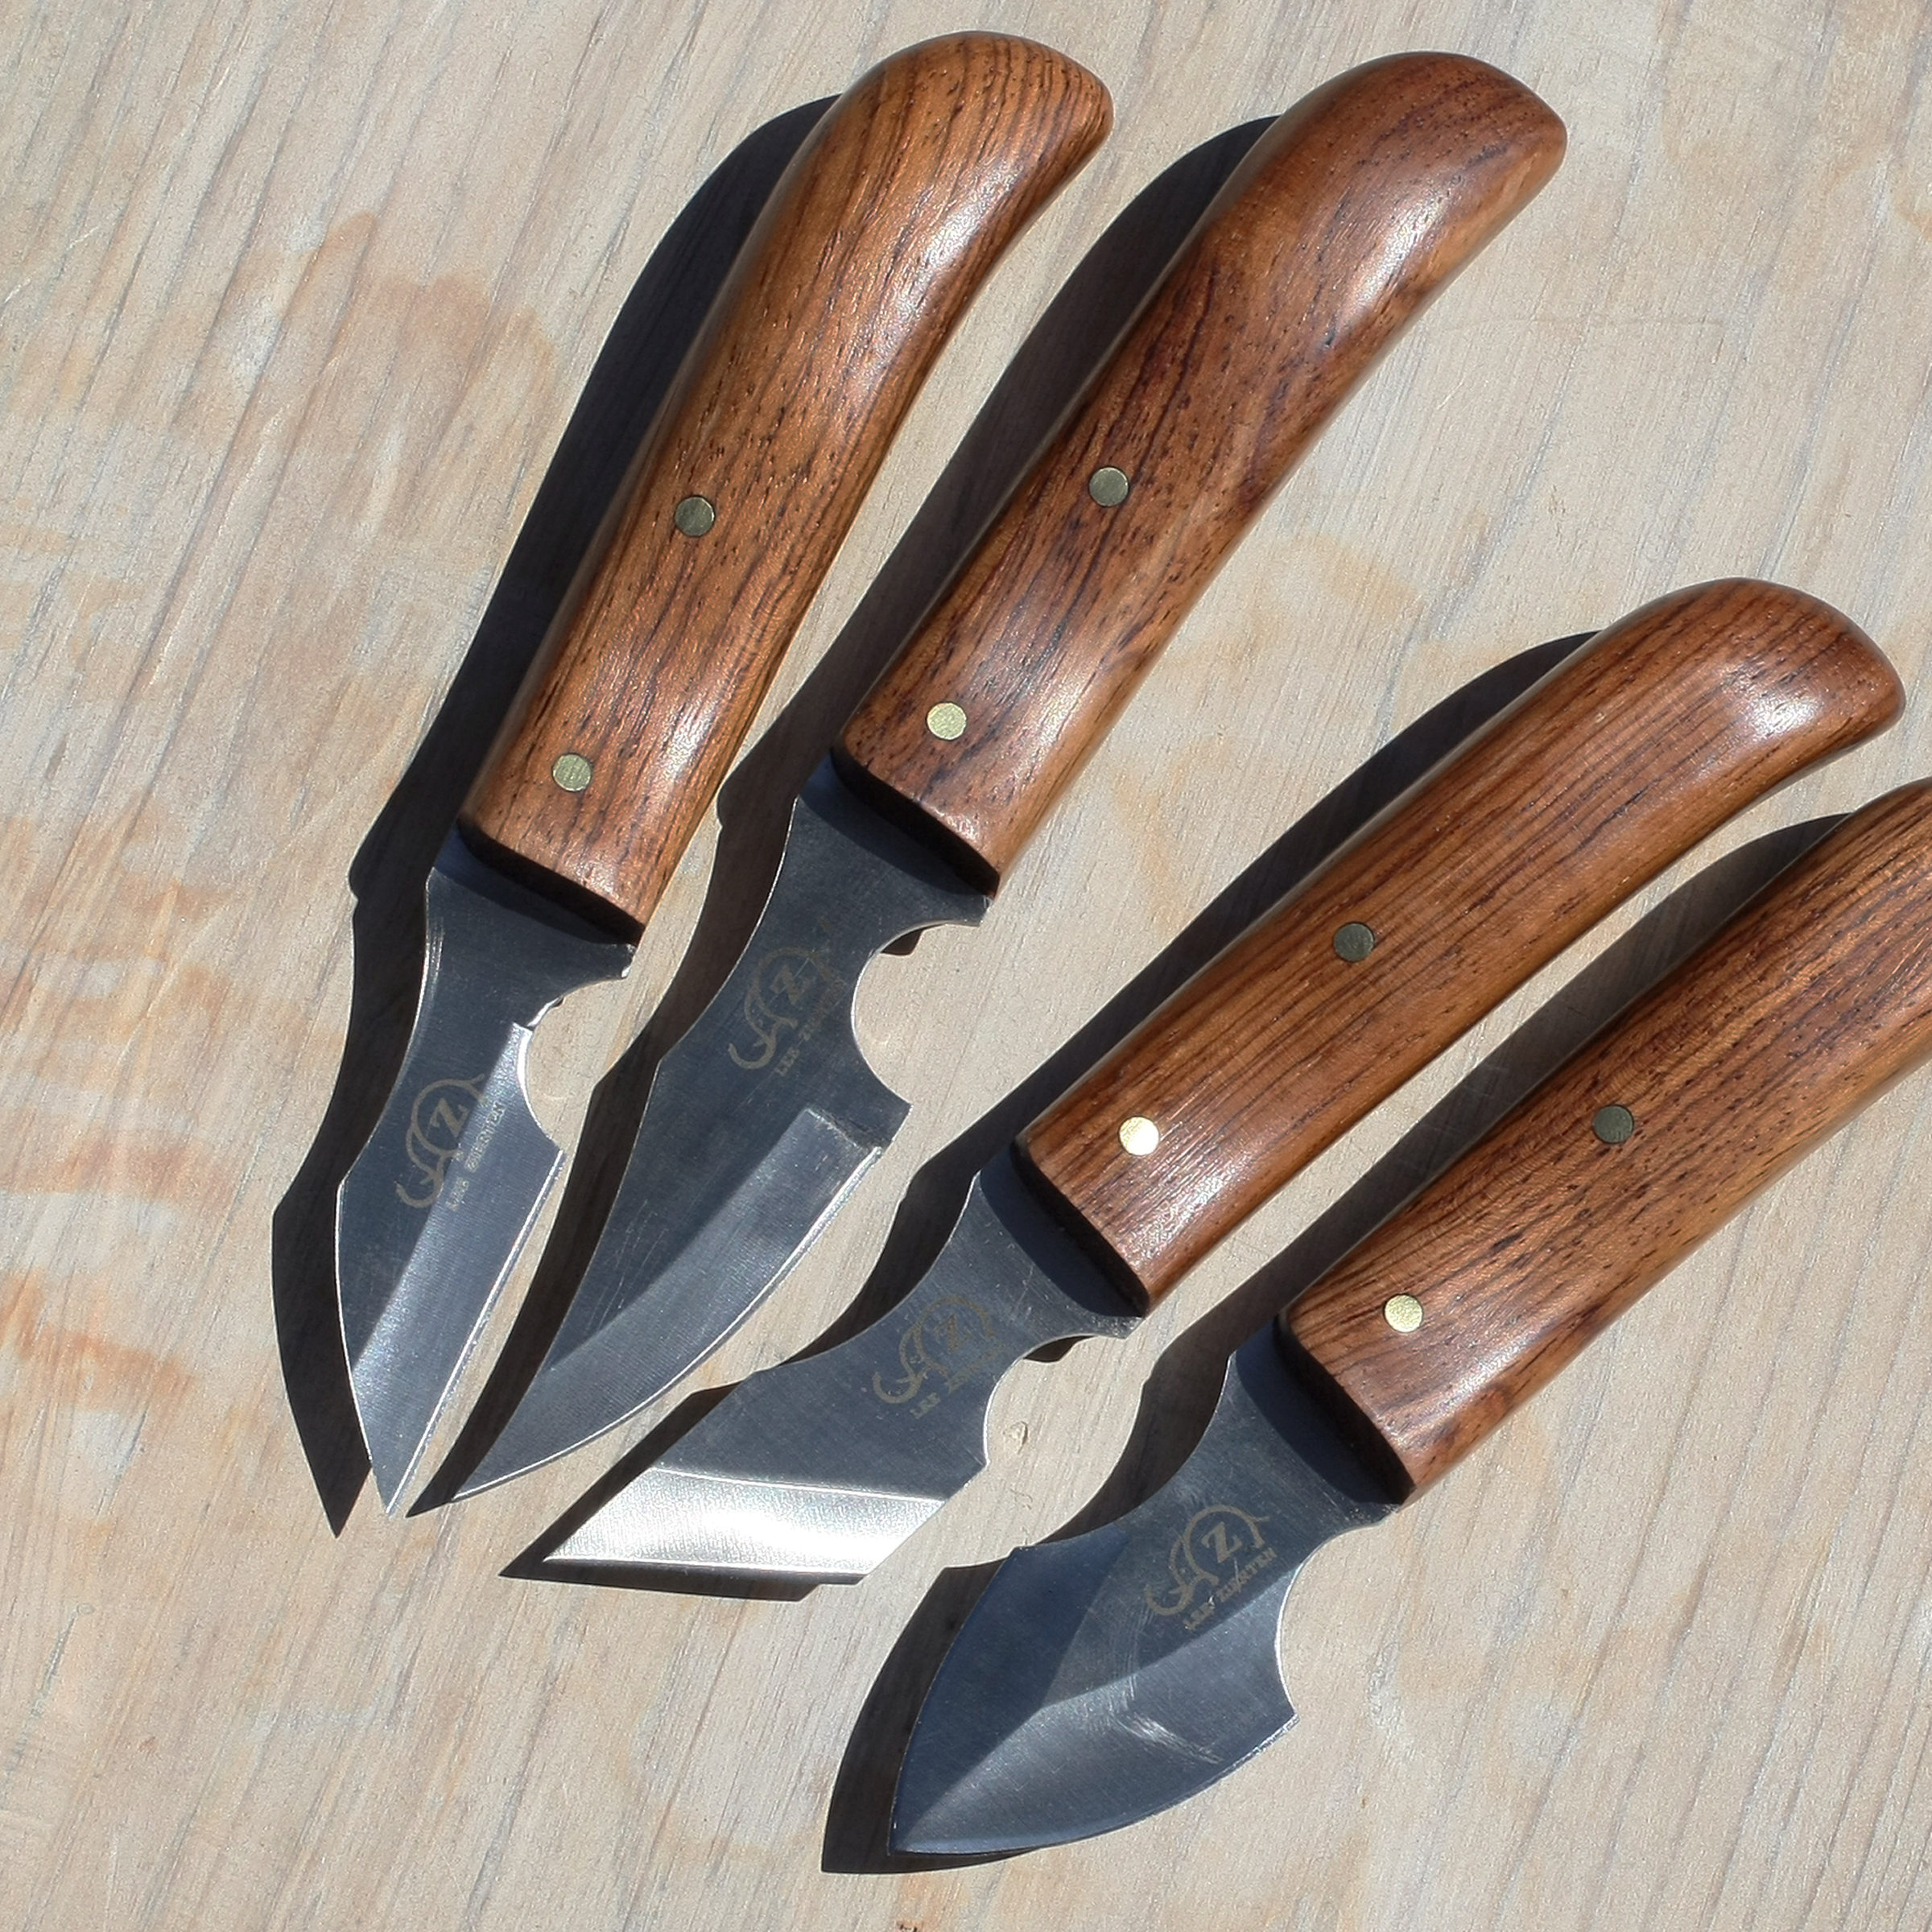 Knife for woodworking